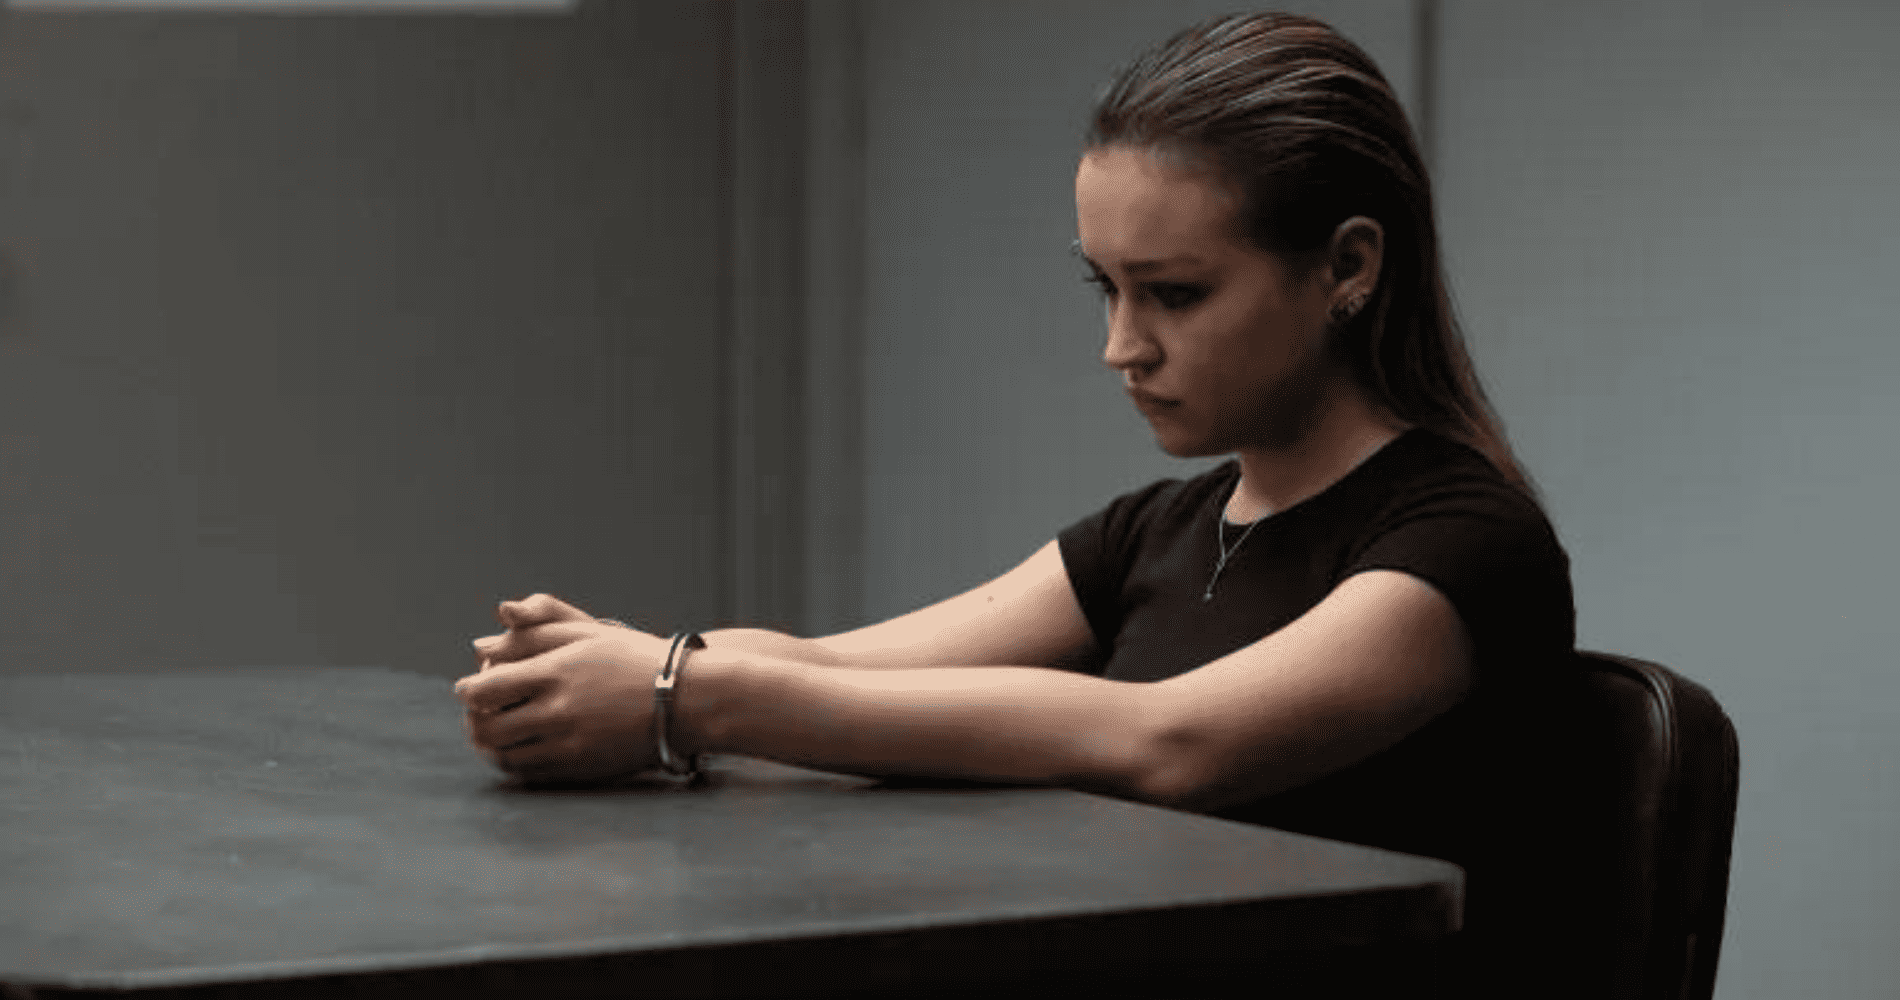 A teenage girl sits at a table handcuffed in a police station in this photo by Entertainment One